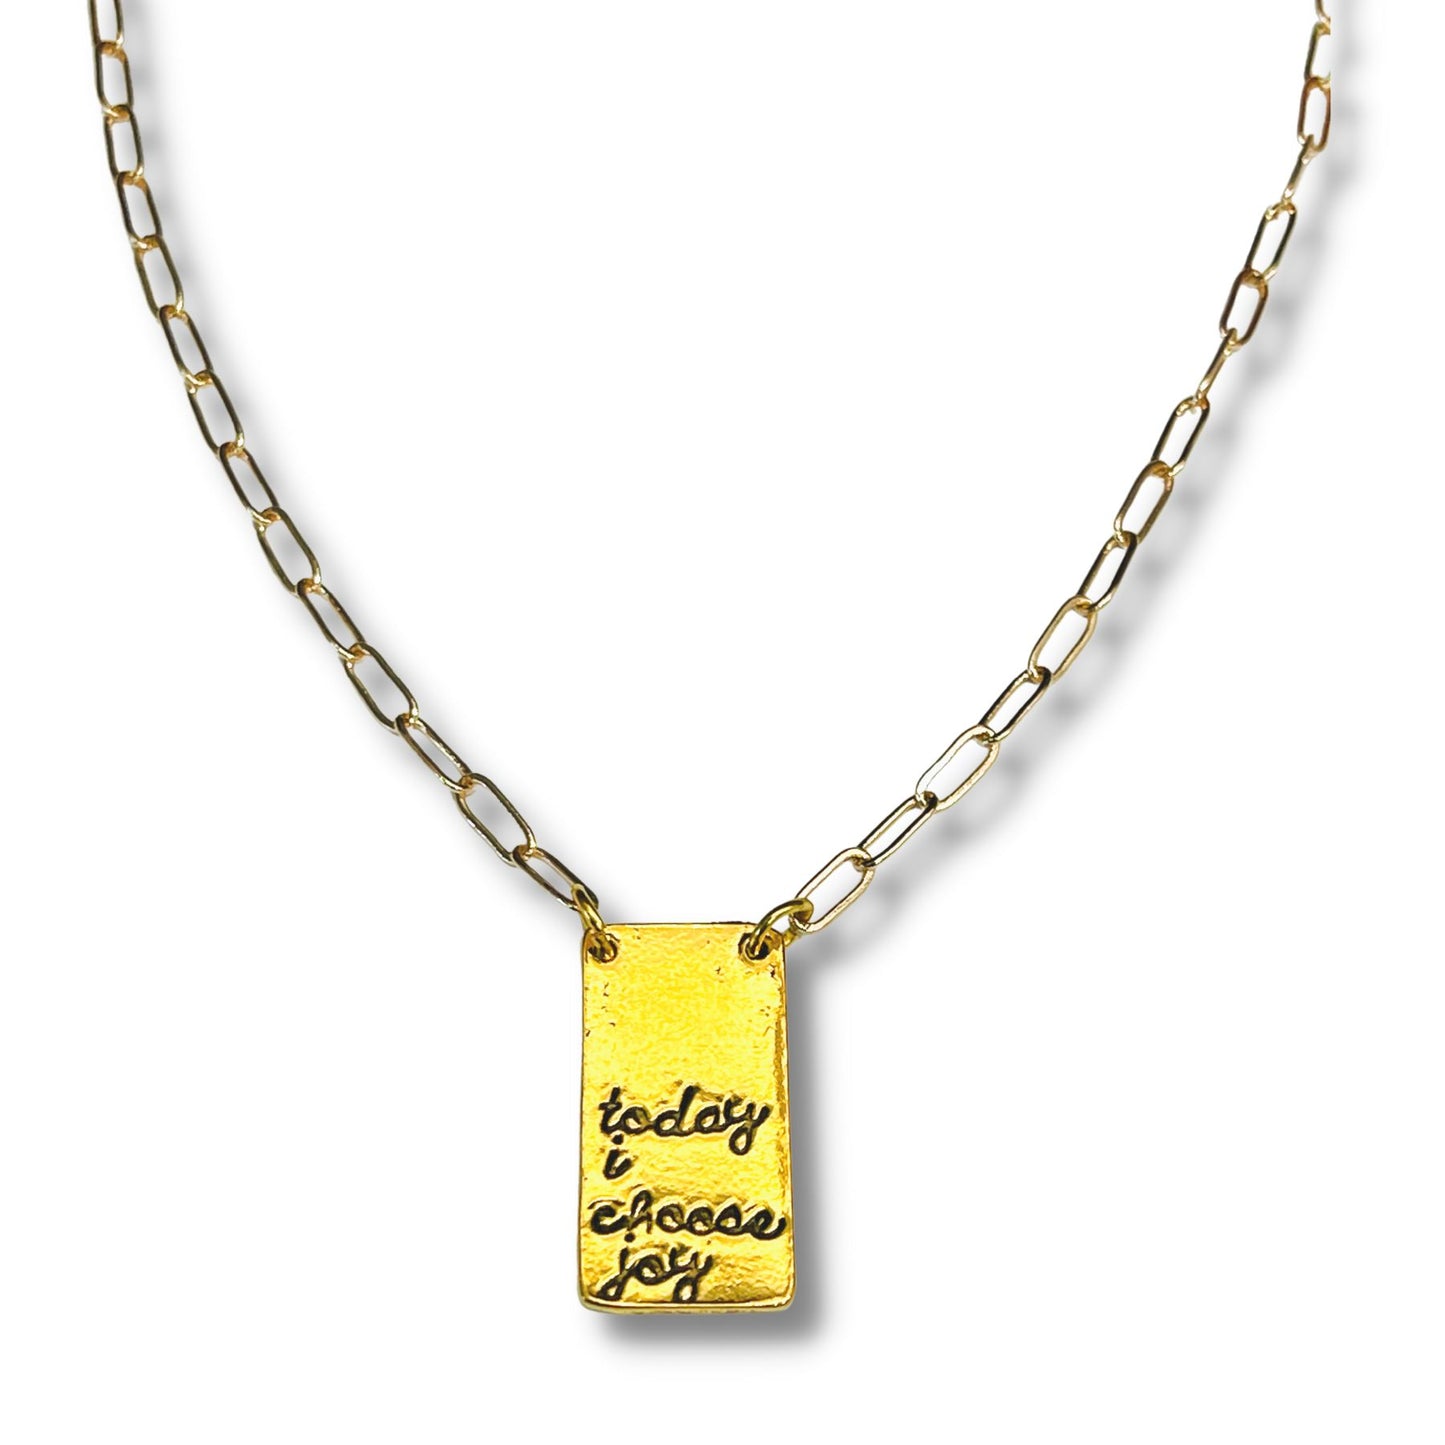 Today I Choose Joy Hand Stamped Necklace